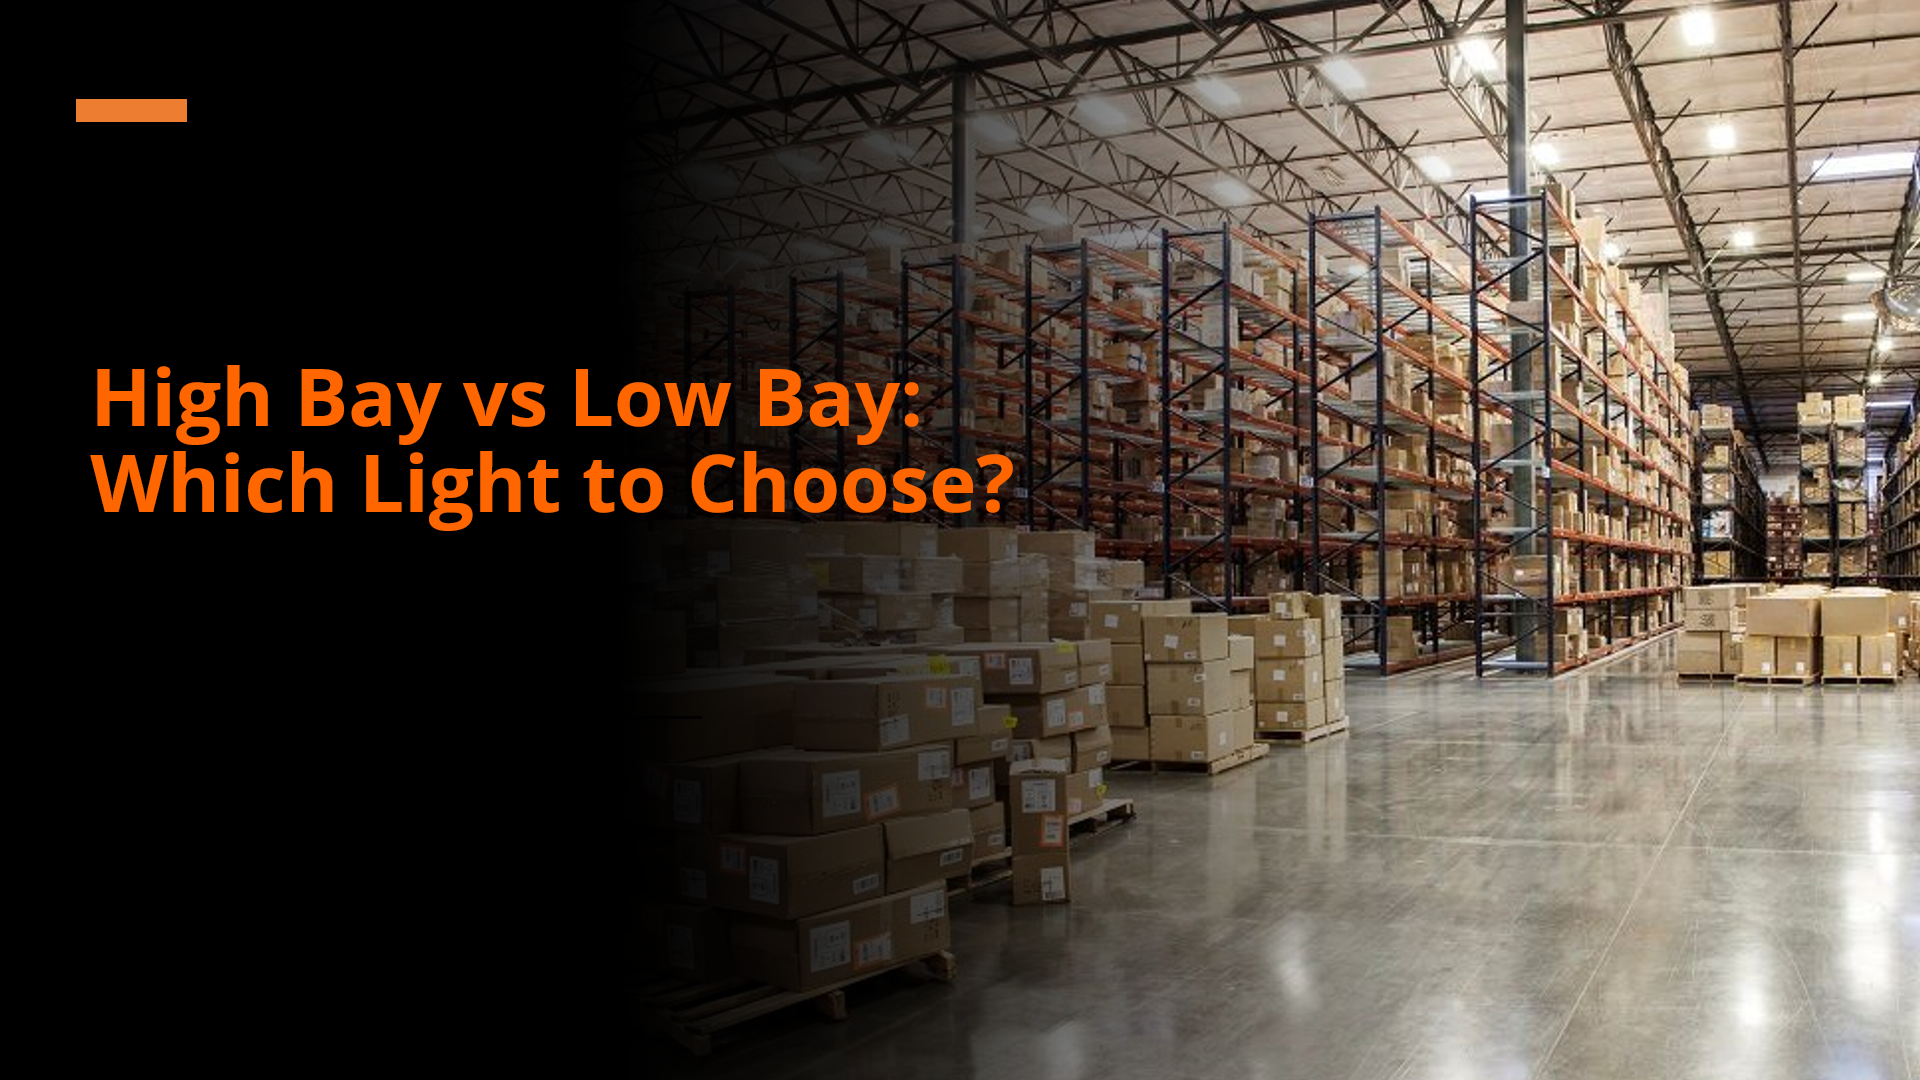 High Bay vs Low Bay: Which light to choose?